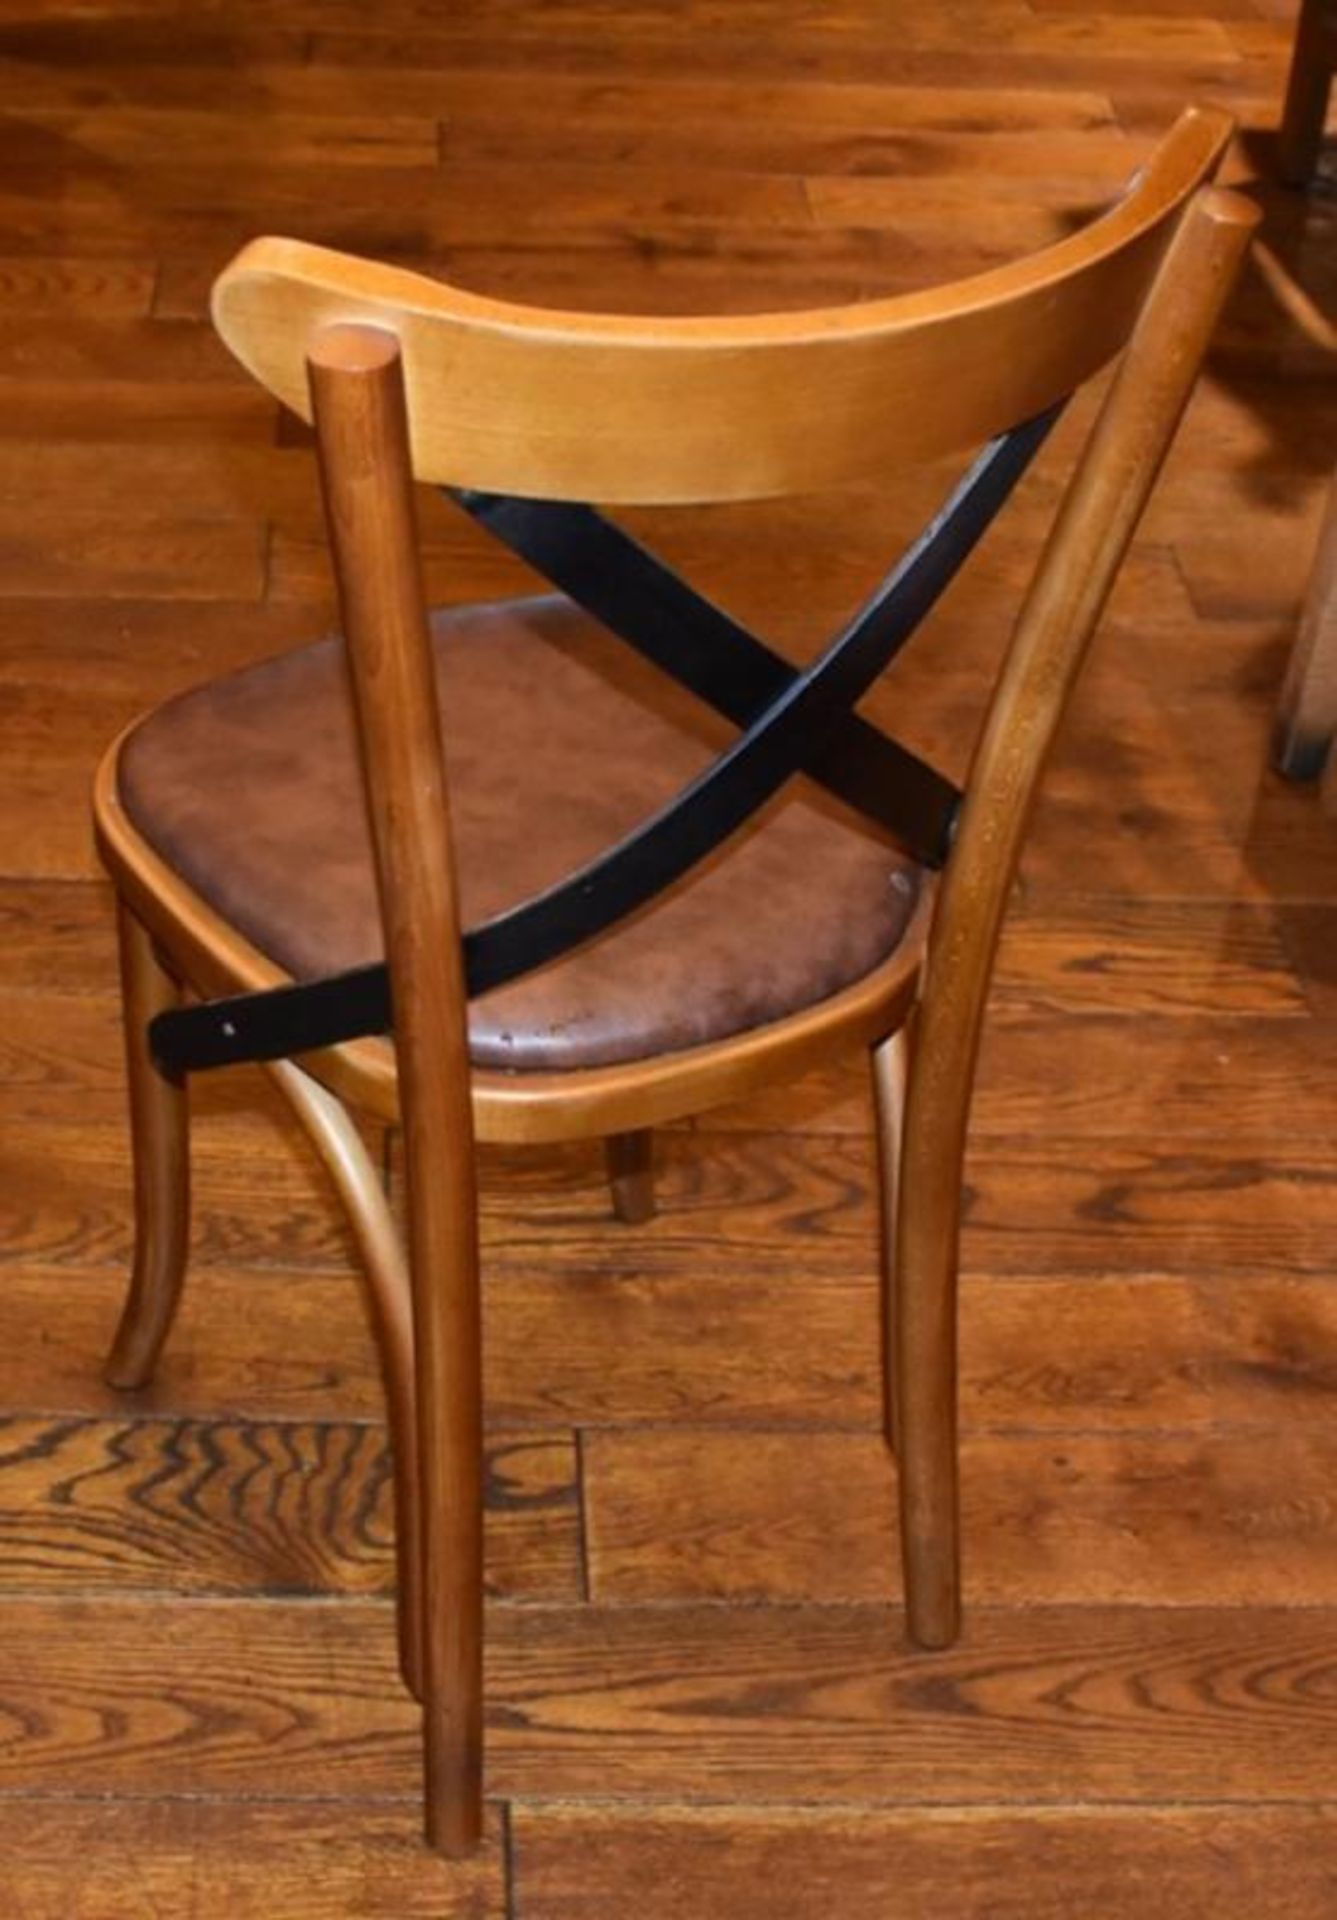 5 x Restaurant Dining Chairs With Metal Crossbacks and Faux Leather Brown Seat Pads H84 x W45 cms - - Image 4 of 4